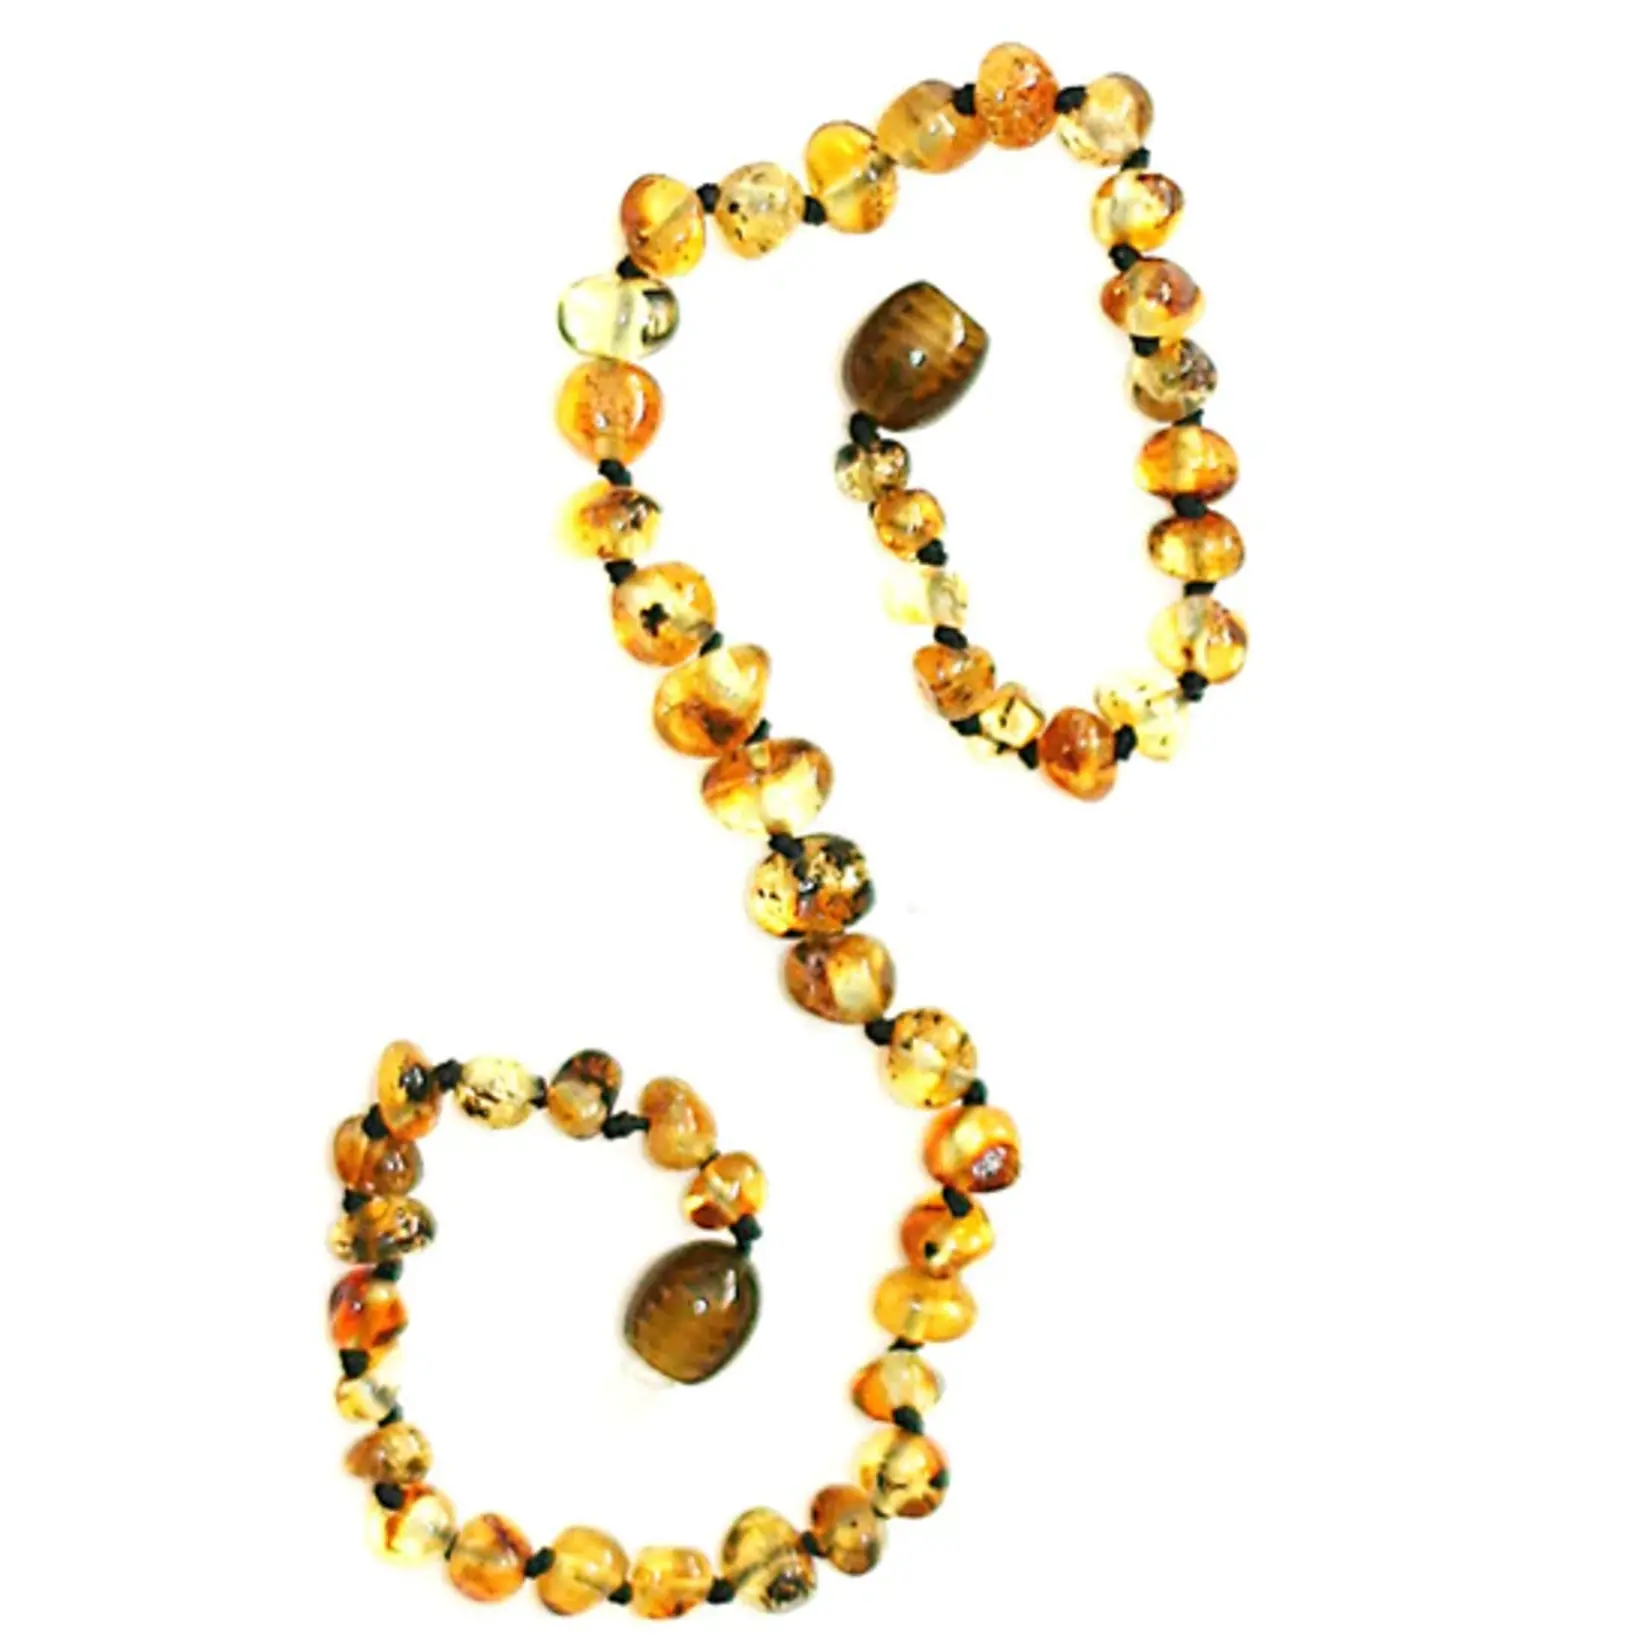 Healing Amber Healing Amber Necklace Olive Bean